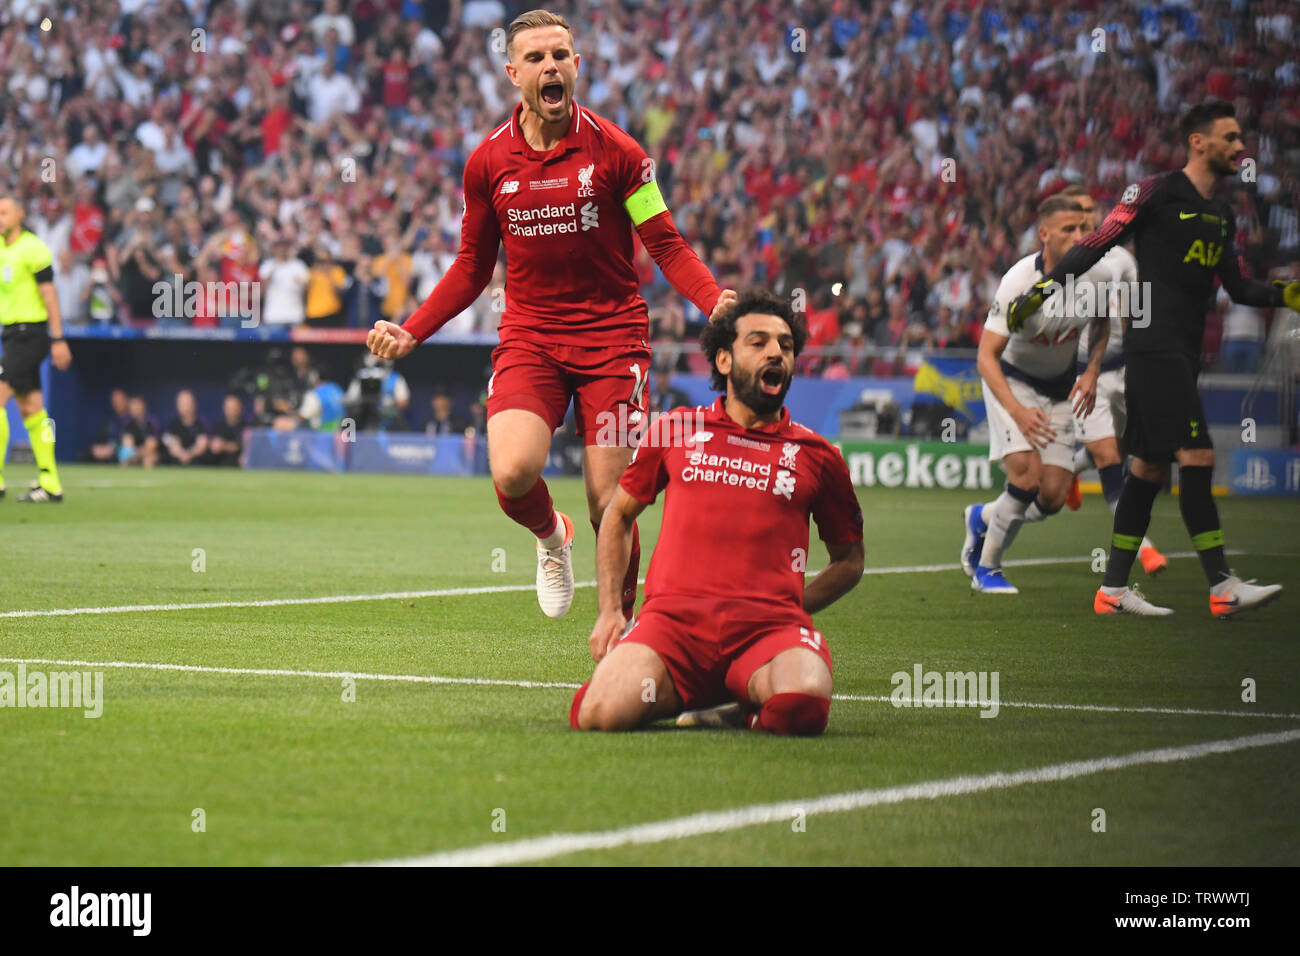 MADRID, SPAIN - JUNE 1, 2019: Mohamed Salah of Liverpool celebrates with Jordan Henderson of Liverpool after he scored during the 2018/19 UEFA Champions League Final between Tottenham Hotspur (England) and Liverpool FC (England) at Wanda Metropolitano. Stock Photo